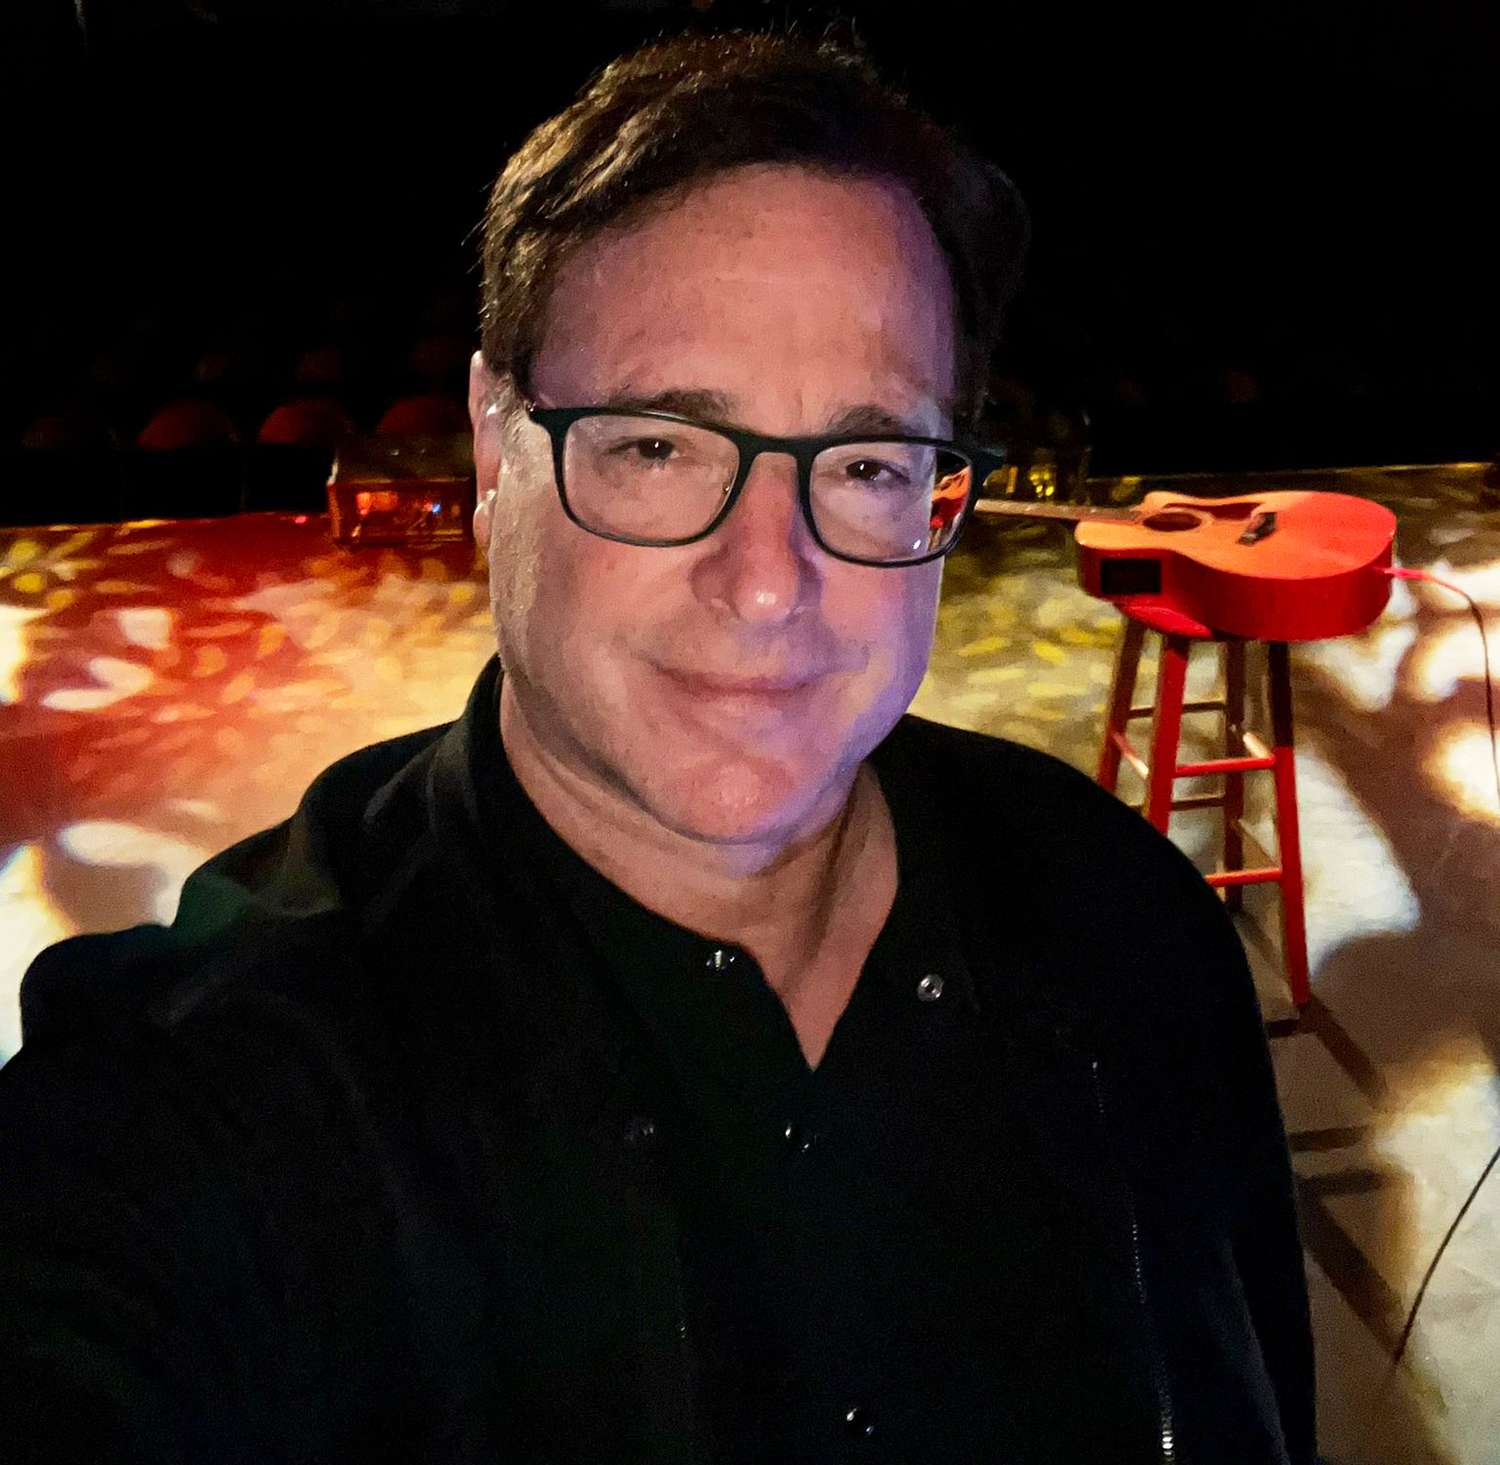 Bob Saget Performed a 2 Hour Standup Show the Night Before His Death: 'Loved Tonight's Show'